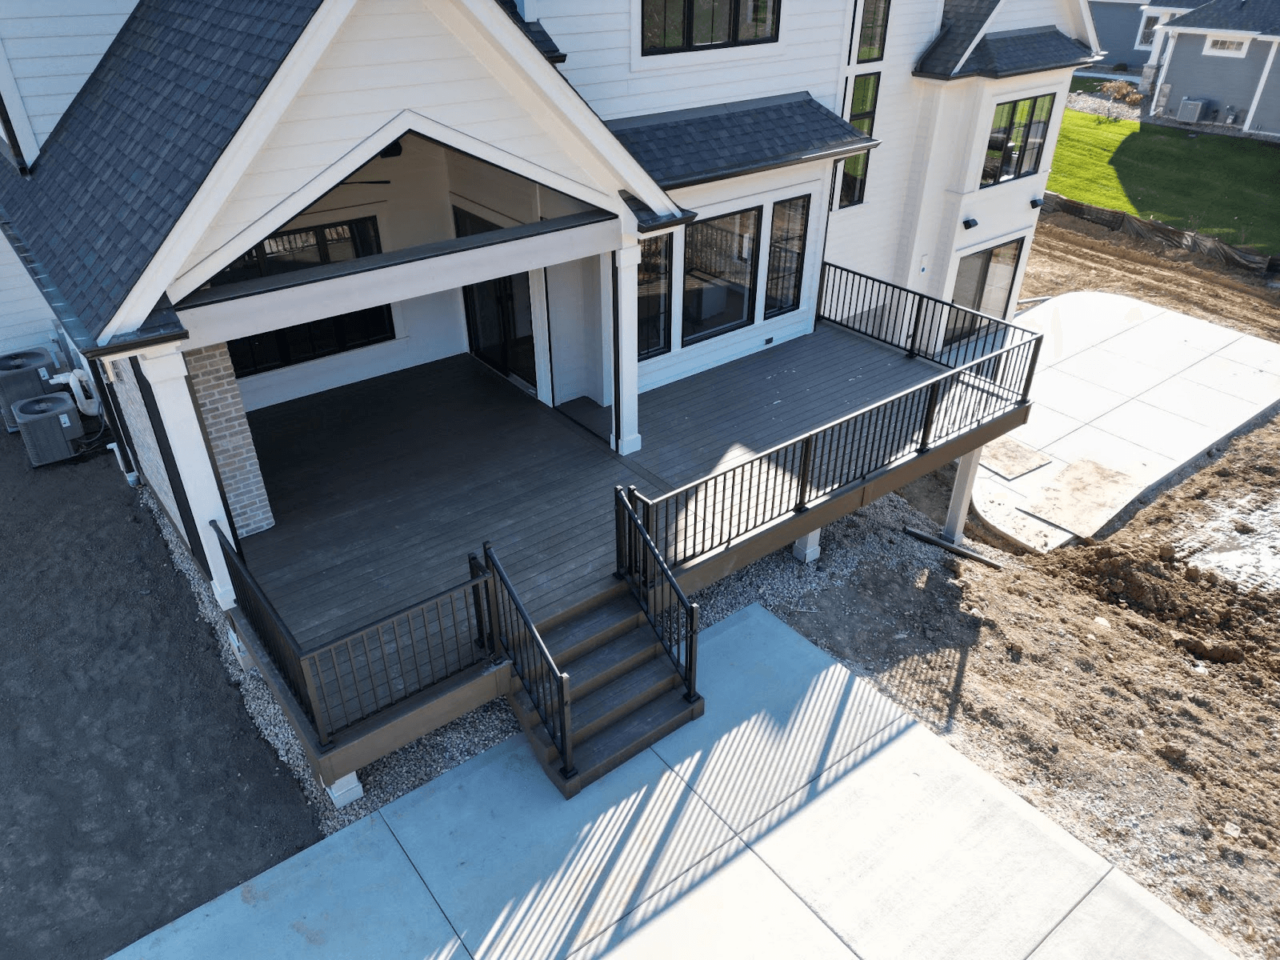 Considerations for Covered Porch